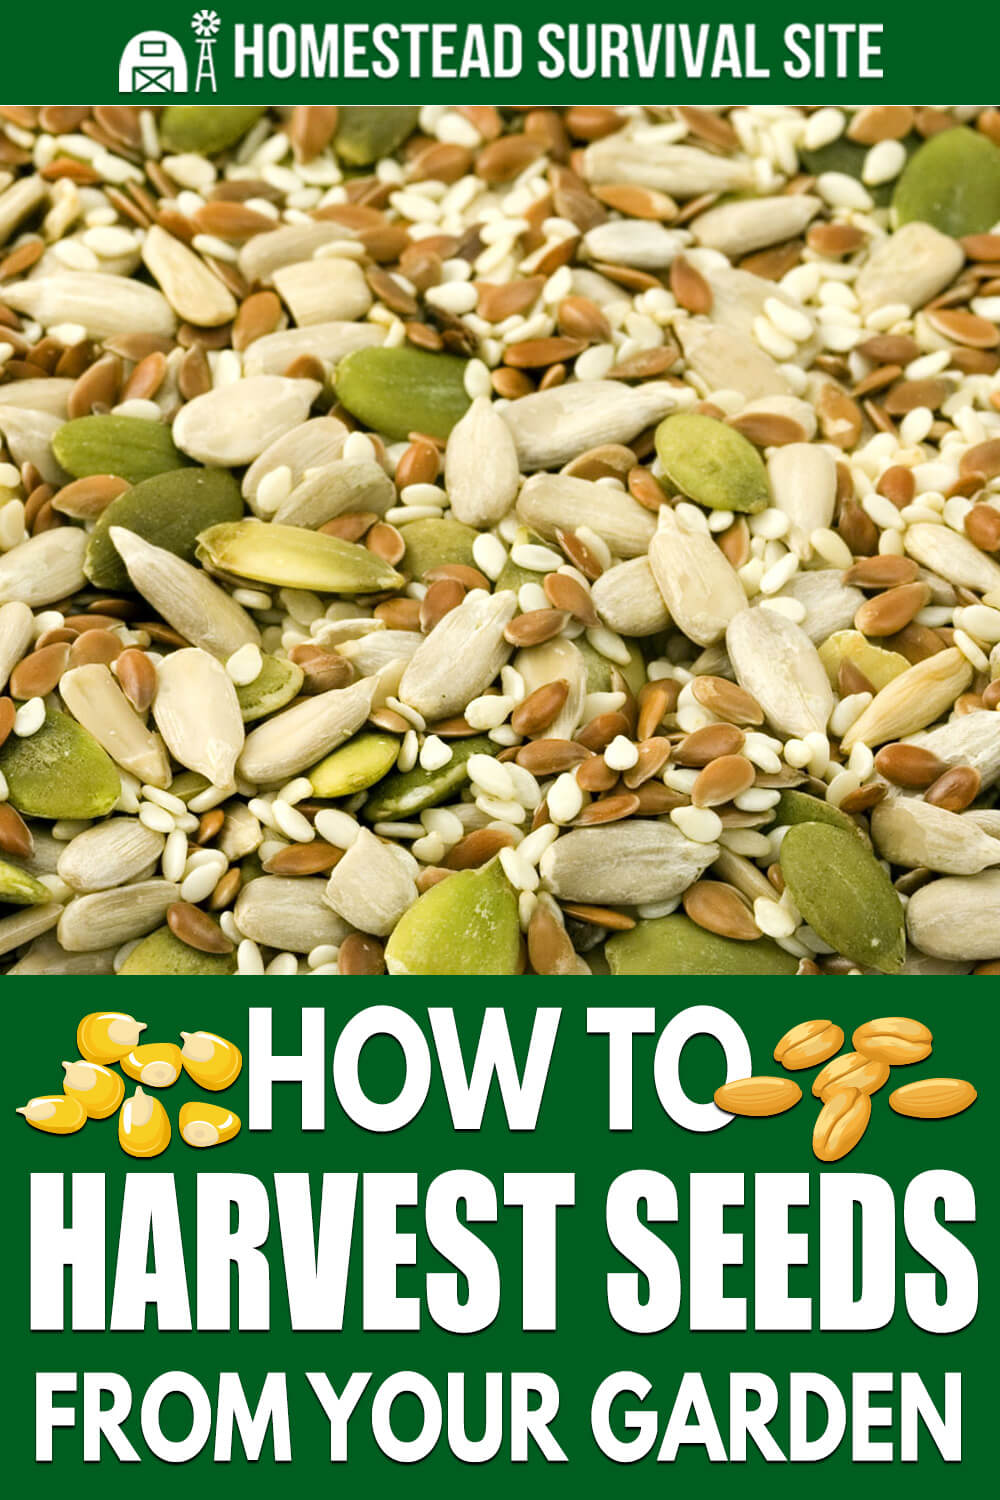 How to Harvest Seeds from Your Garden